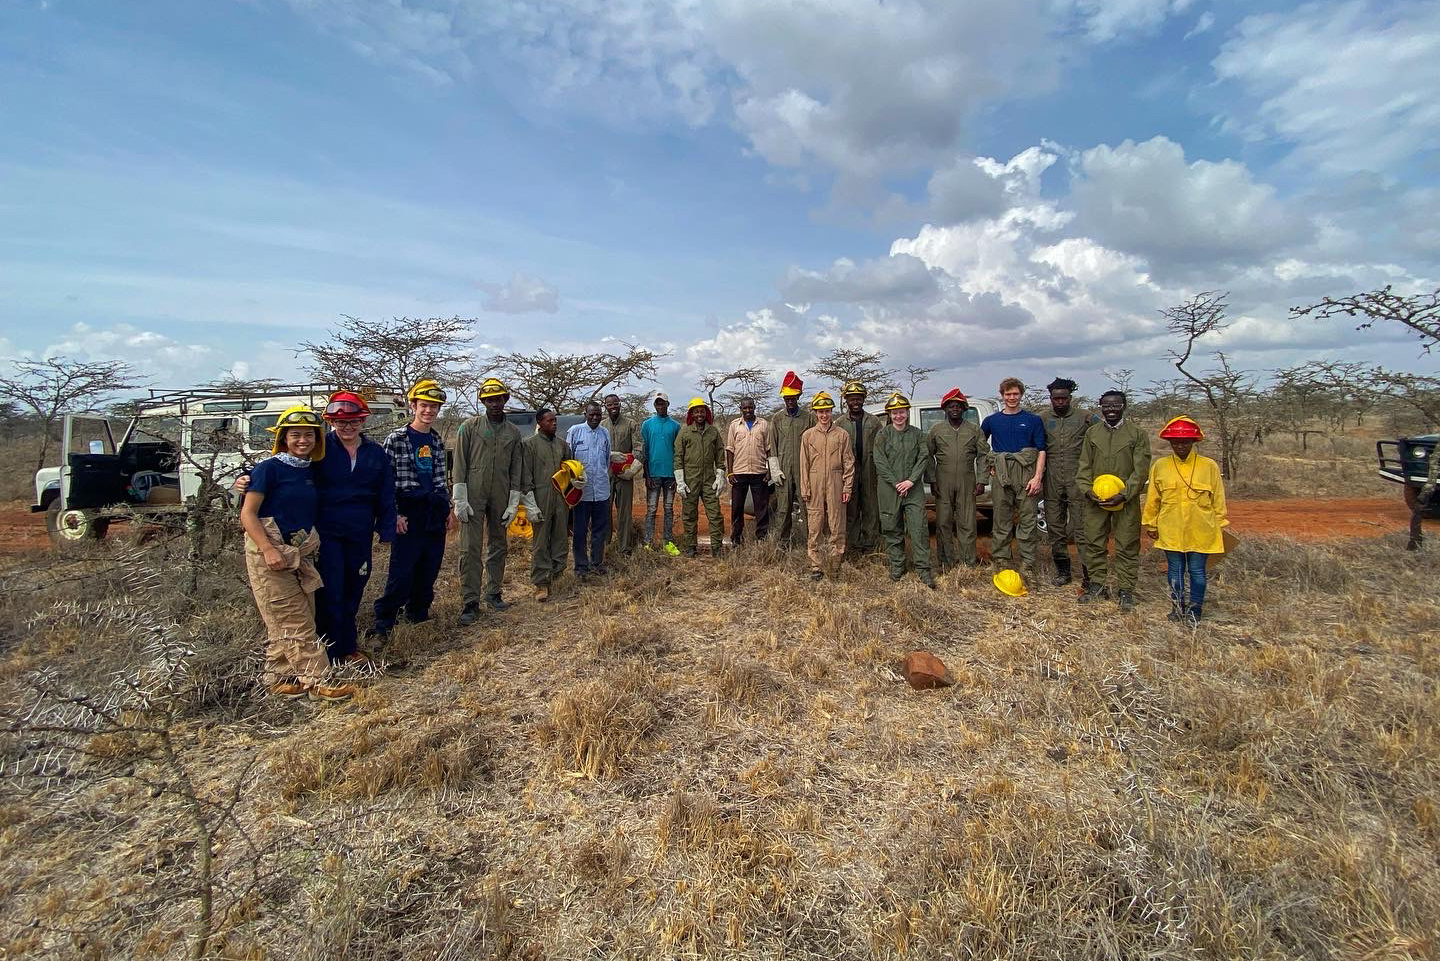 The burn team at the Mpala Research Centre poses for a picture in the savanna.